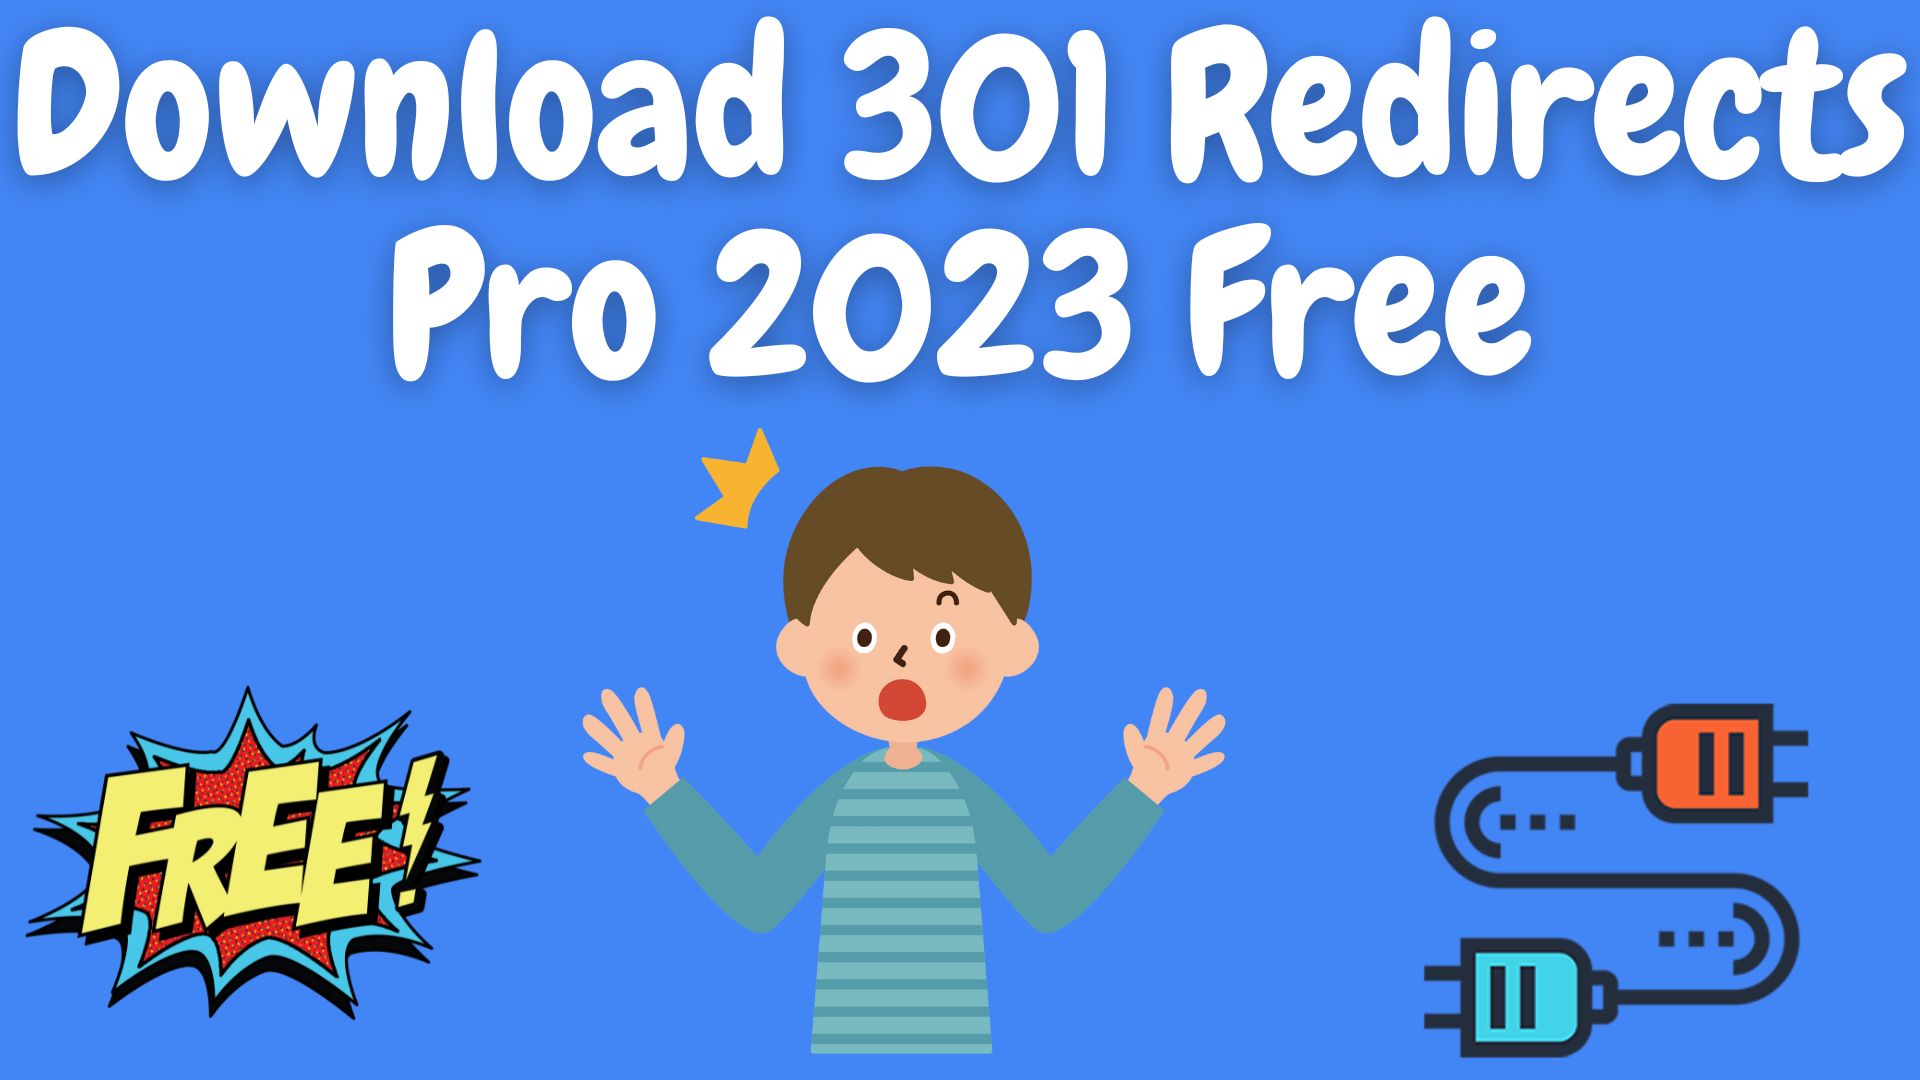 Download 301 redirects pro 2023 free